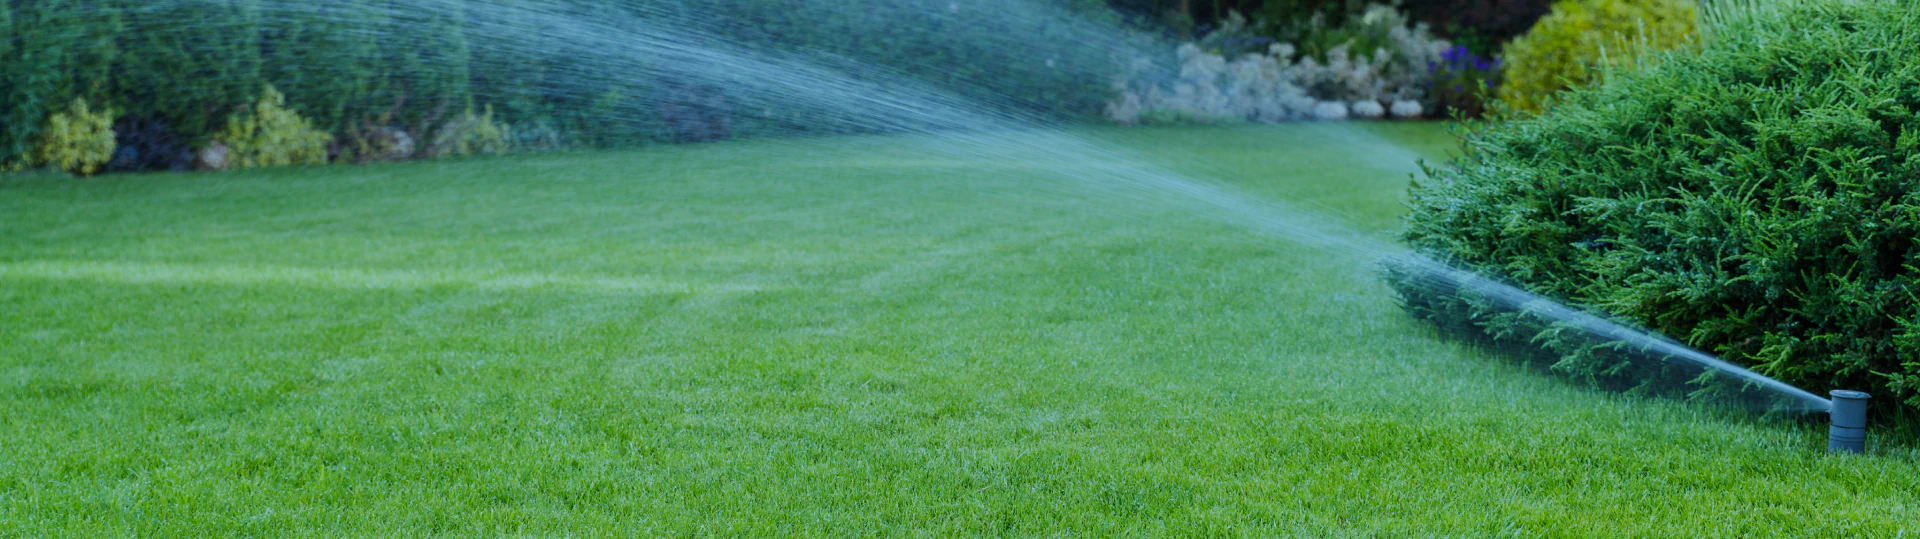 wide lawn with water sprinkler